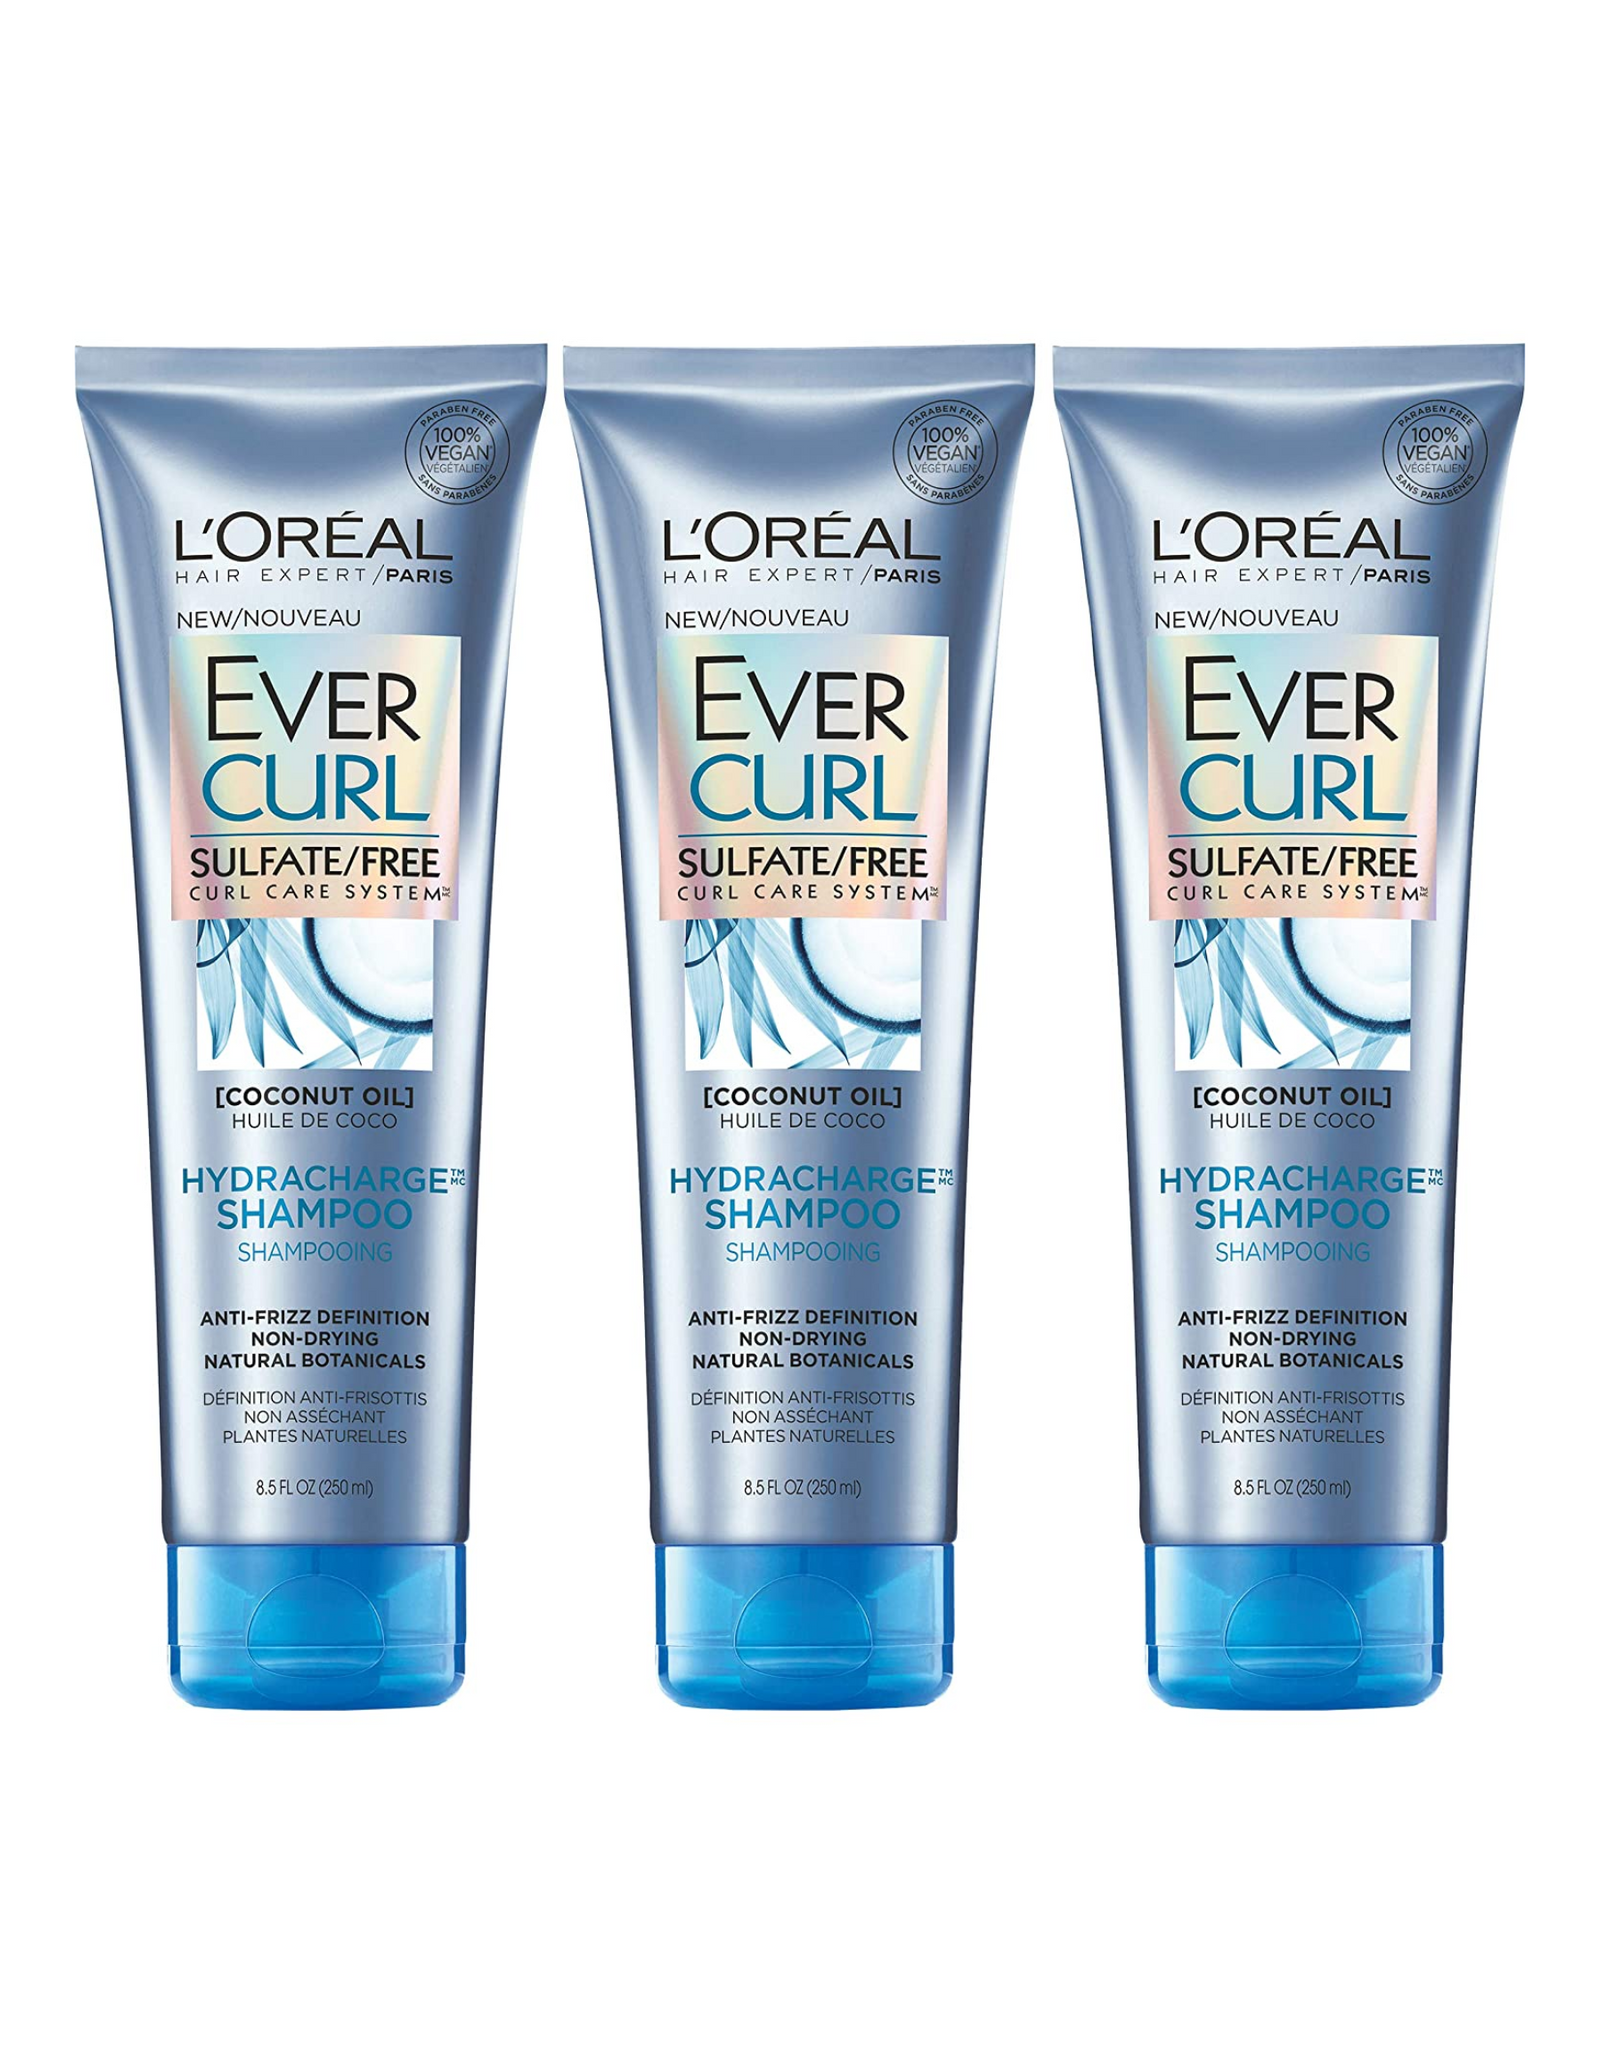 L'Oreal Paris Hair Care Evercurl Hydracharge Shampoo Sulfate Free, with Coconut Oil, 8.5 fl oz each (Pack of 3)